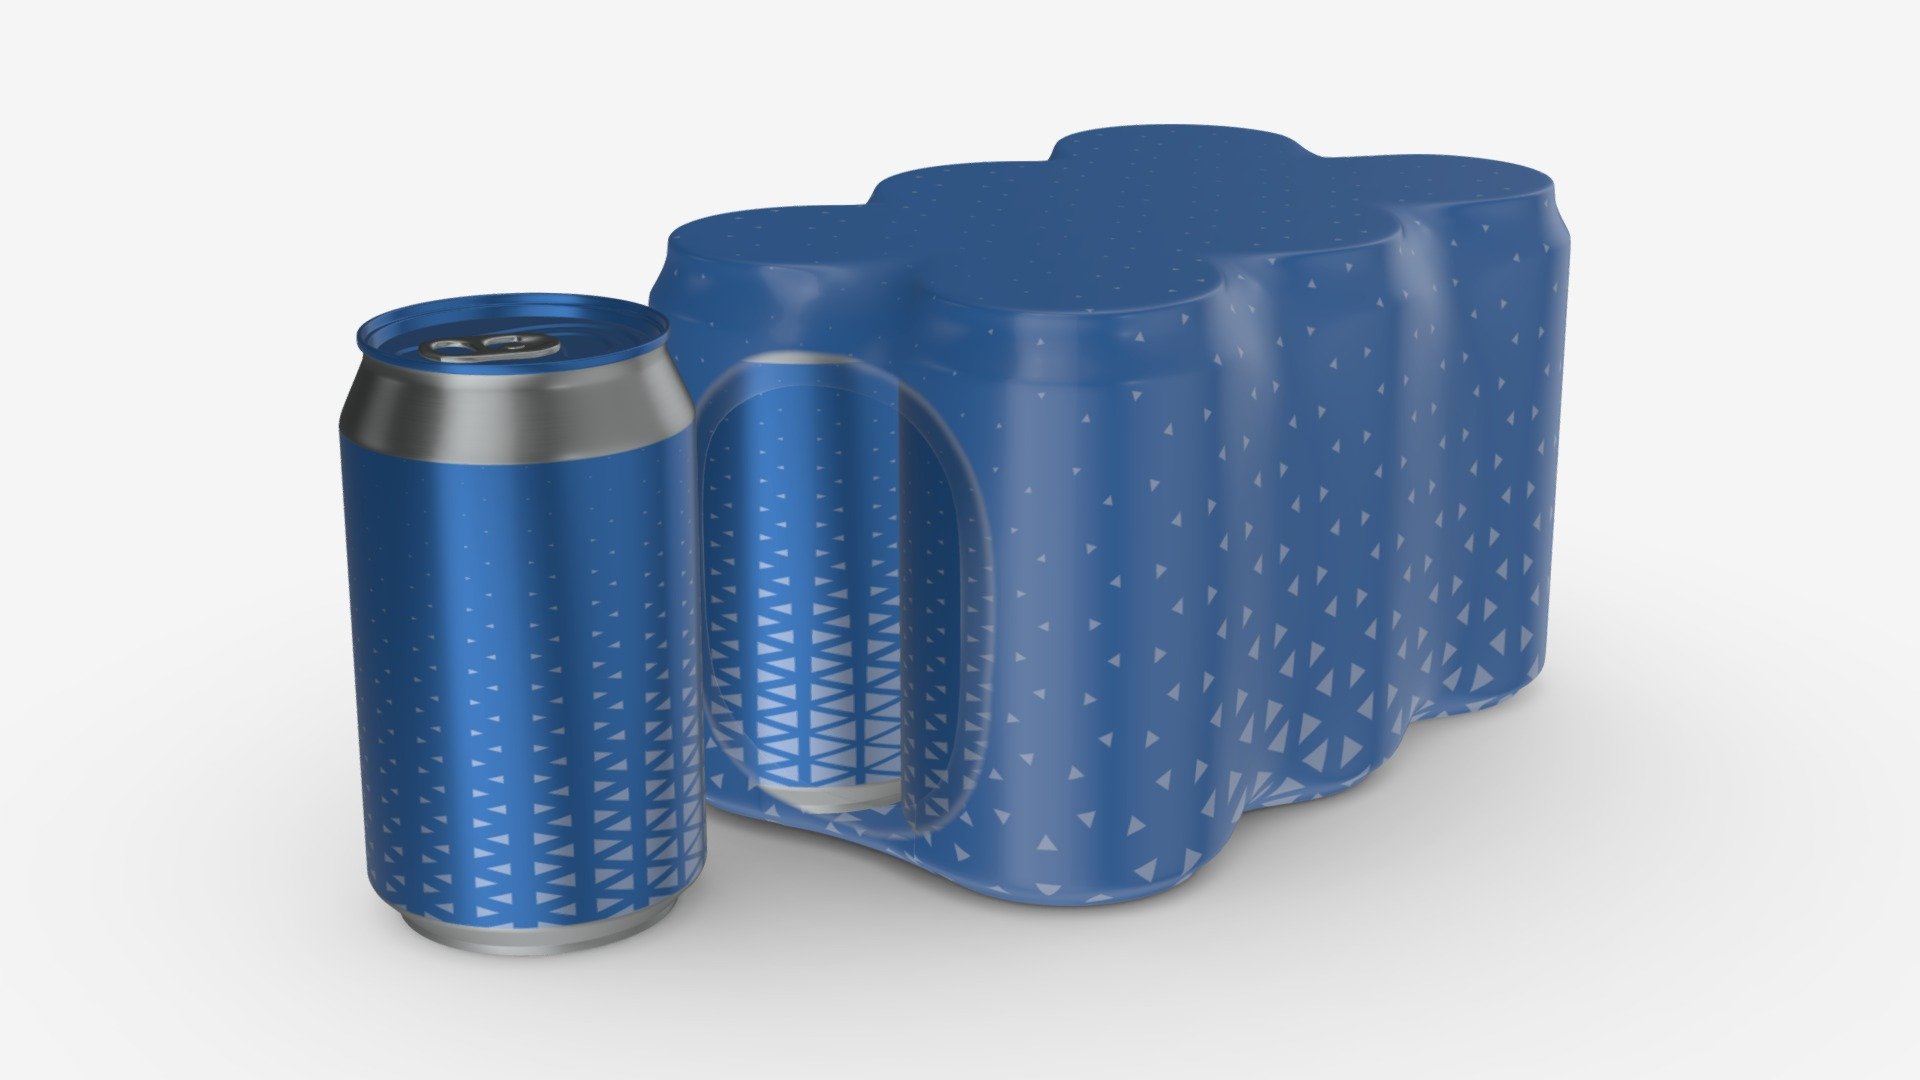 Packaging for 330 ml six beer soda cans